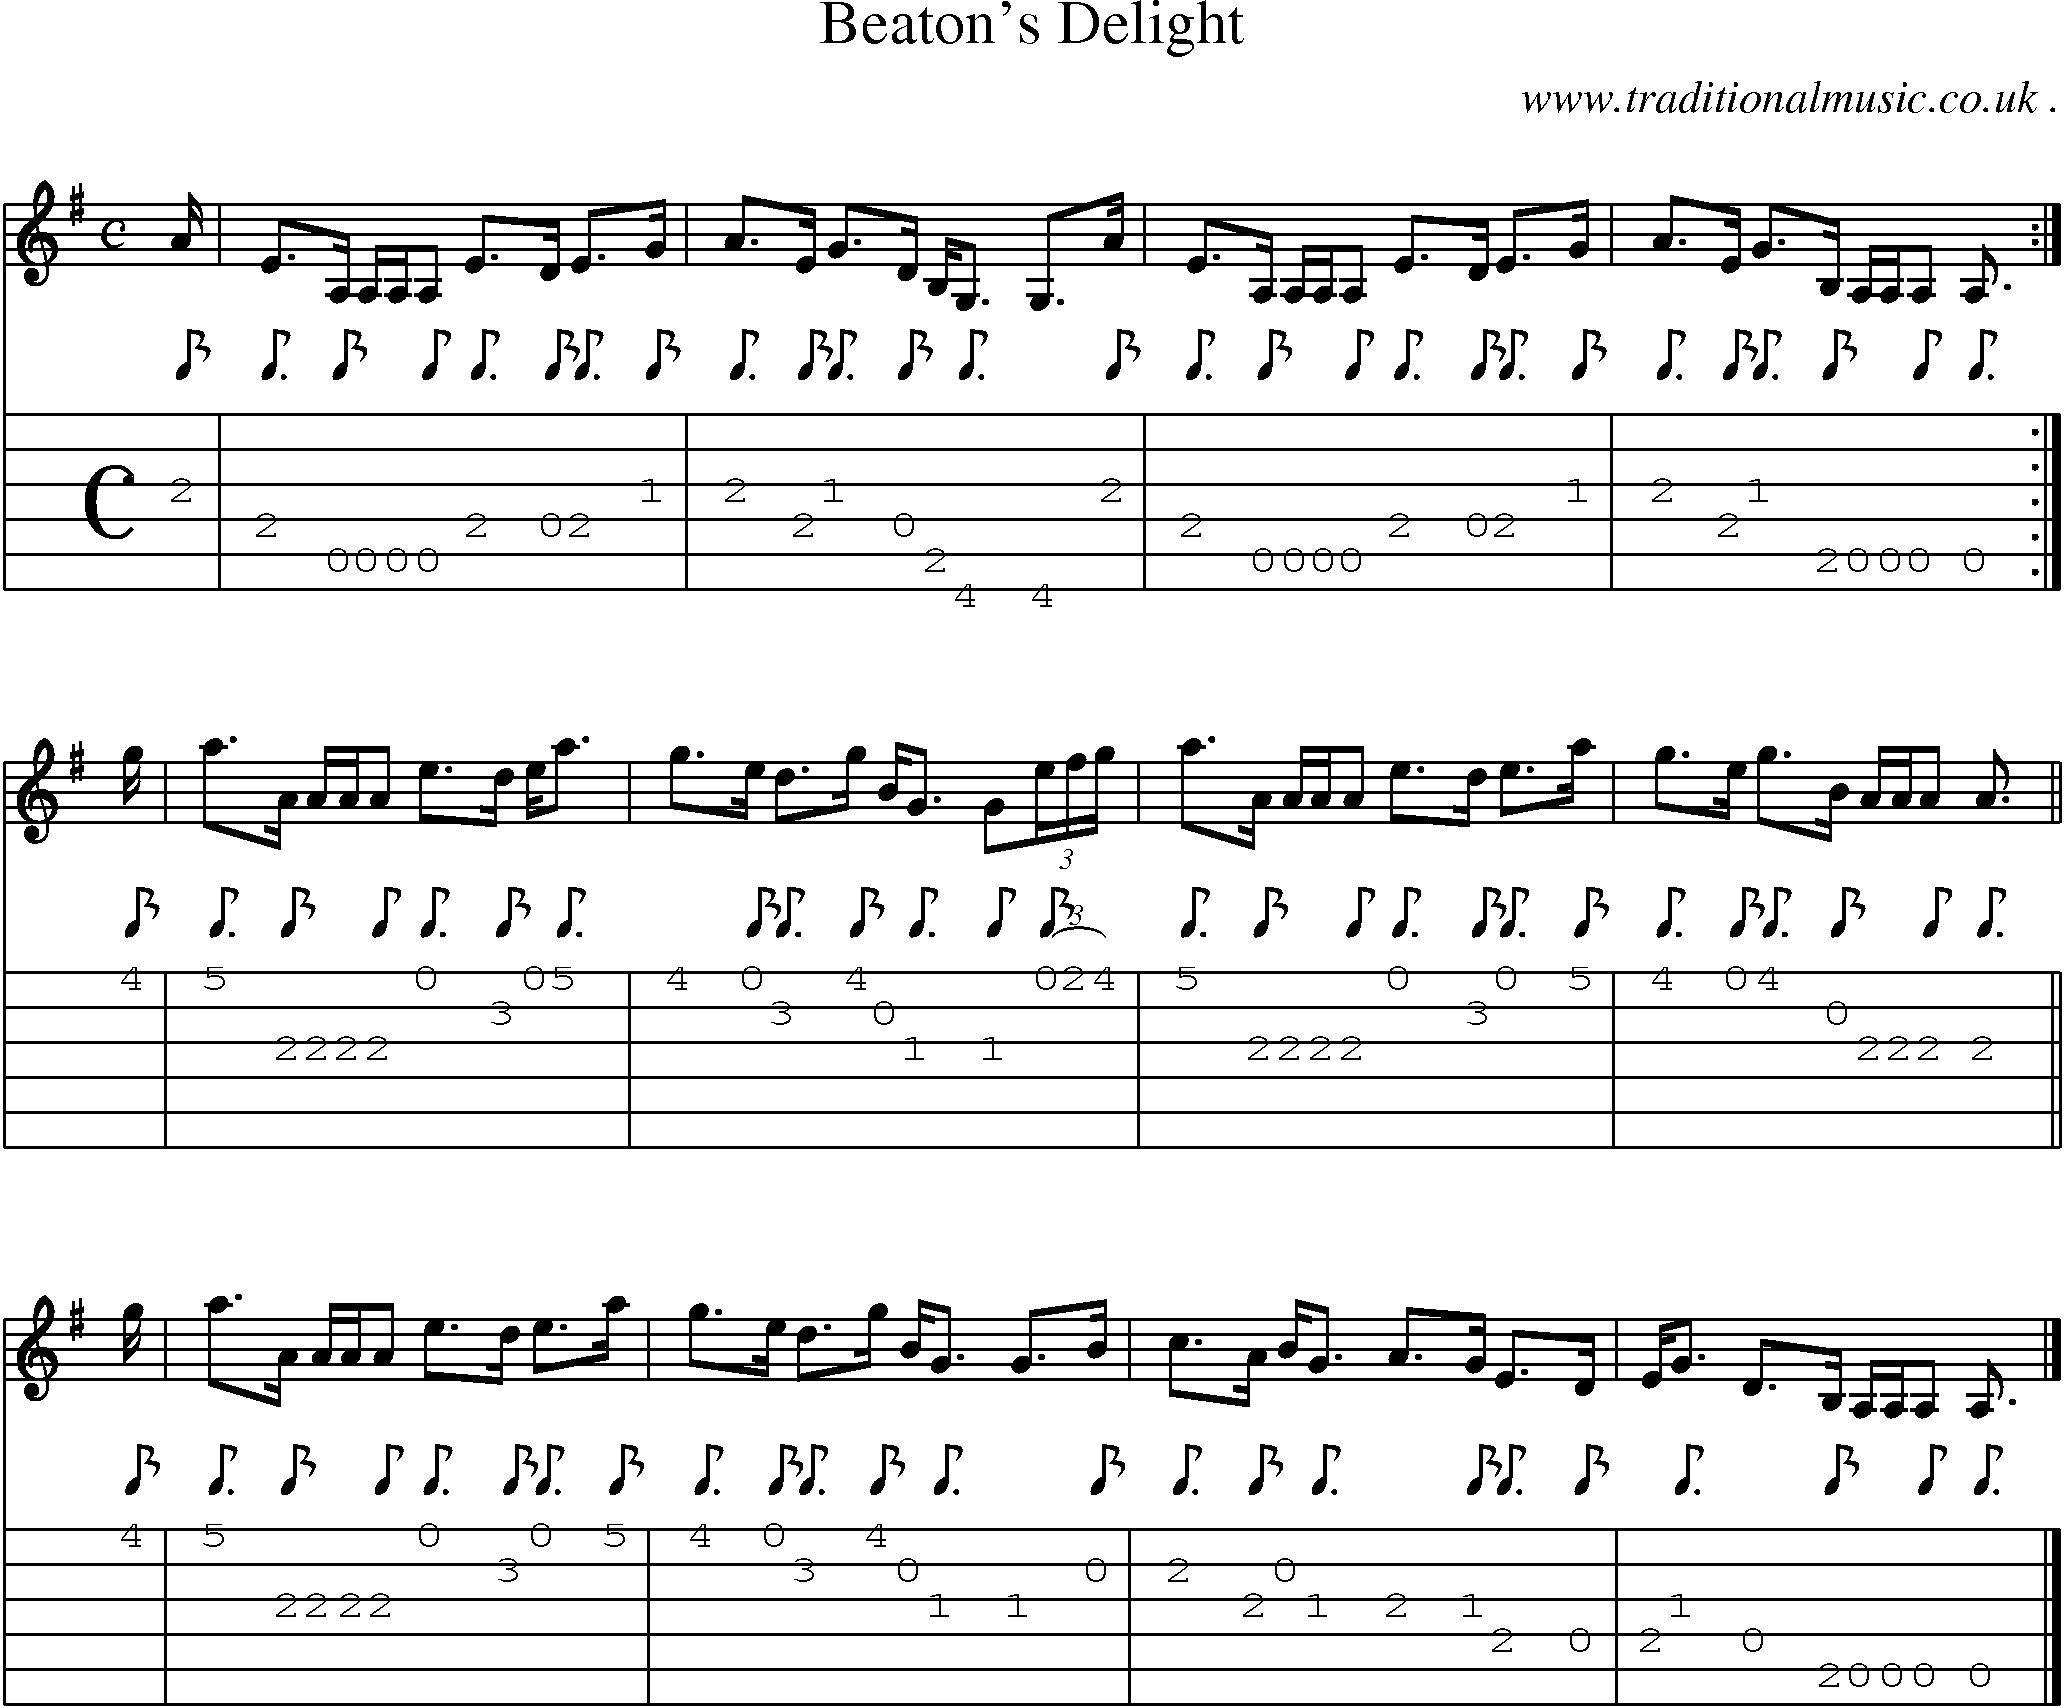 Sheet-music  score, Chords and Guitar Tabs for Beatons Delight